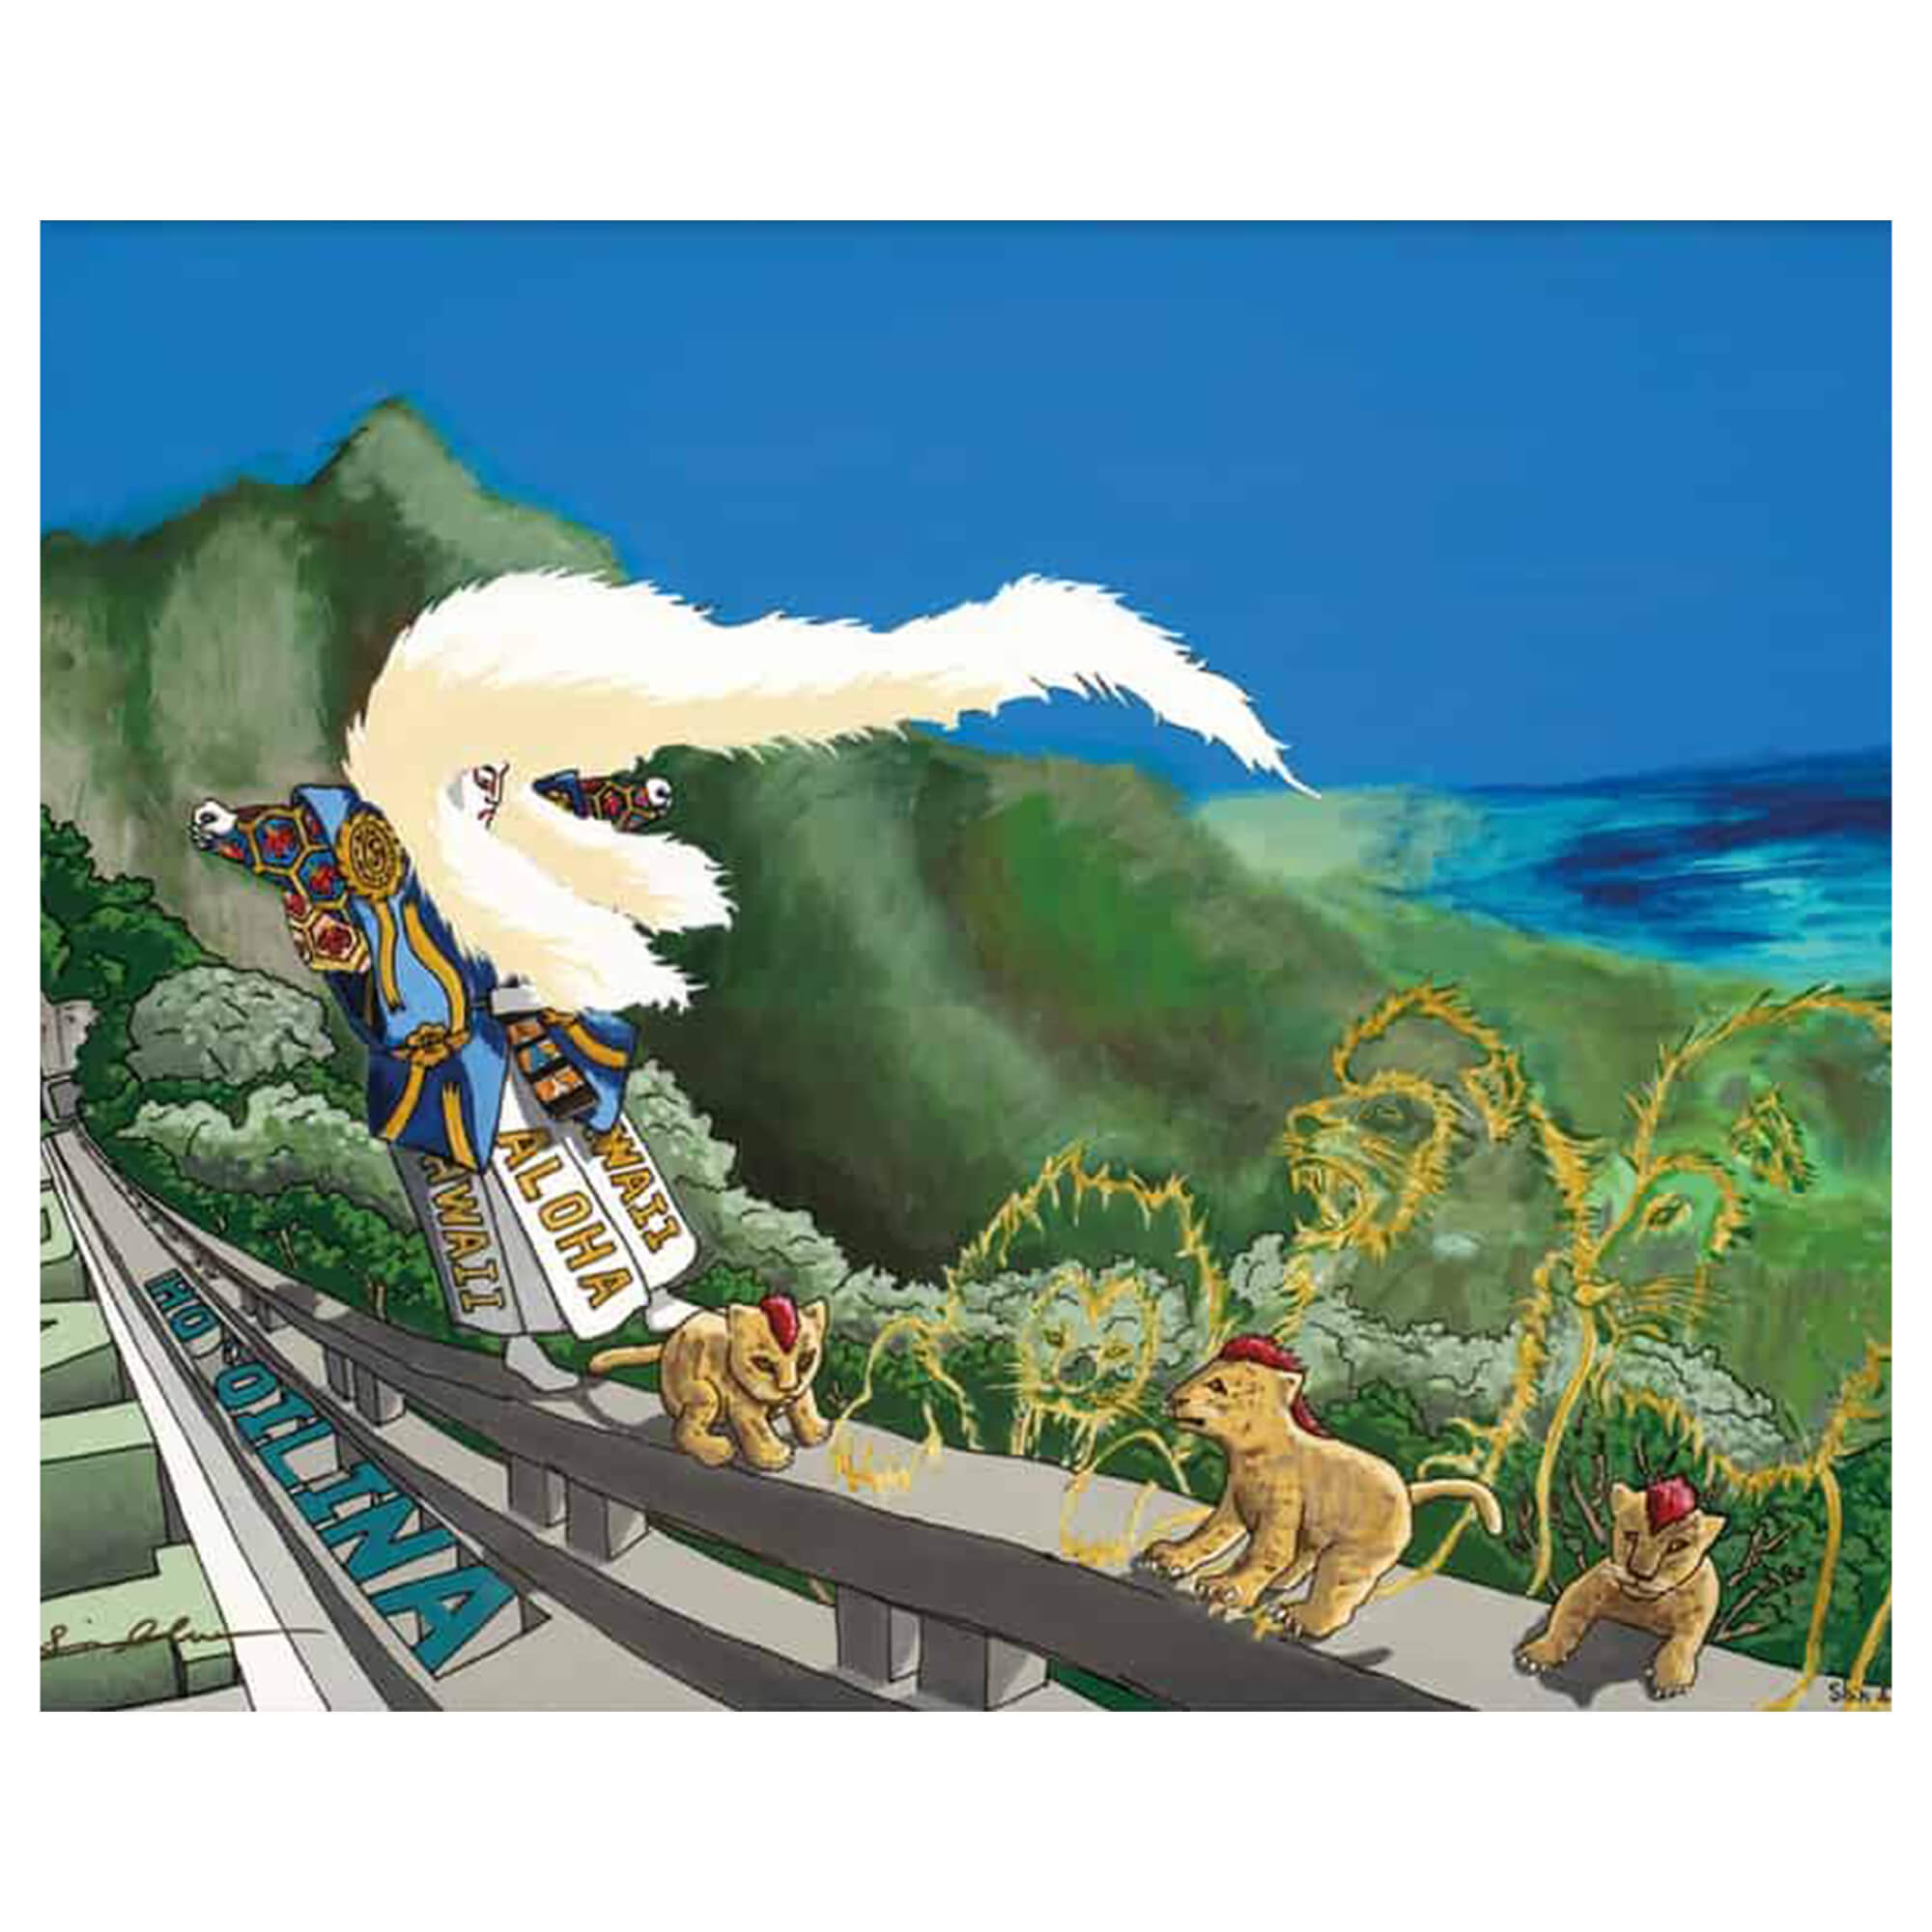 Matted art print of an imagined scene taking place between characters on the Pali by Hawaii artist Shin Kato